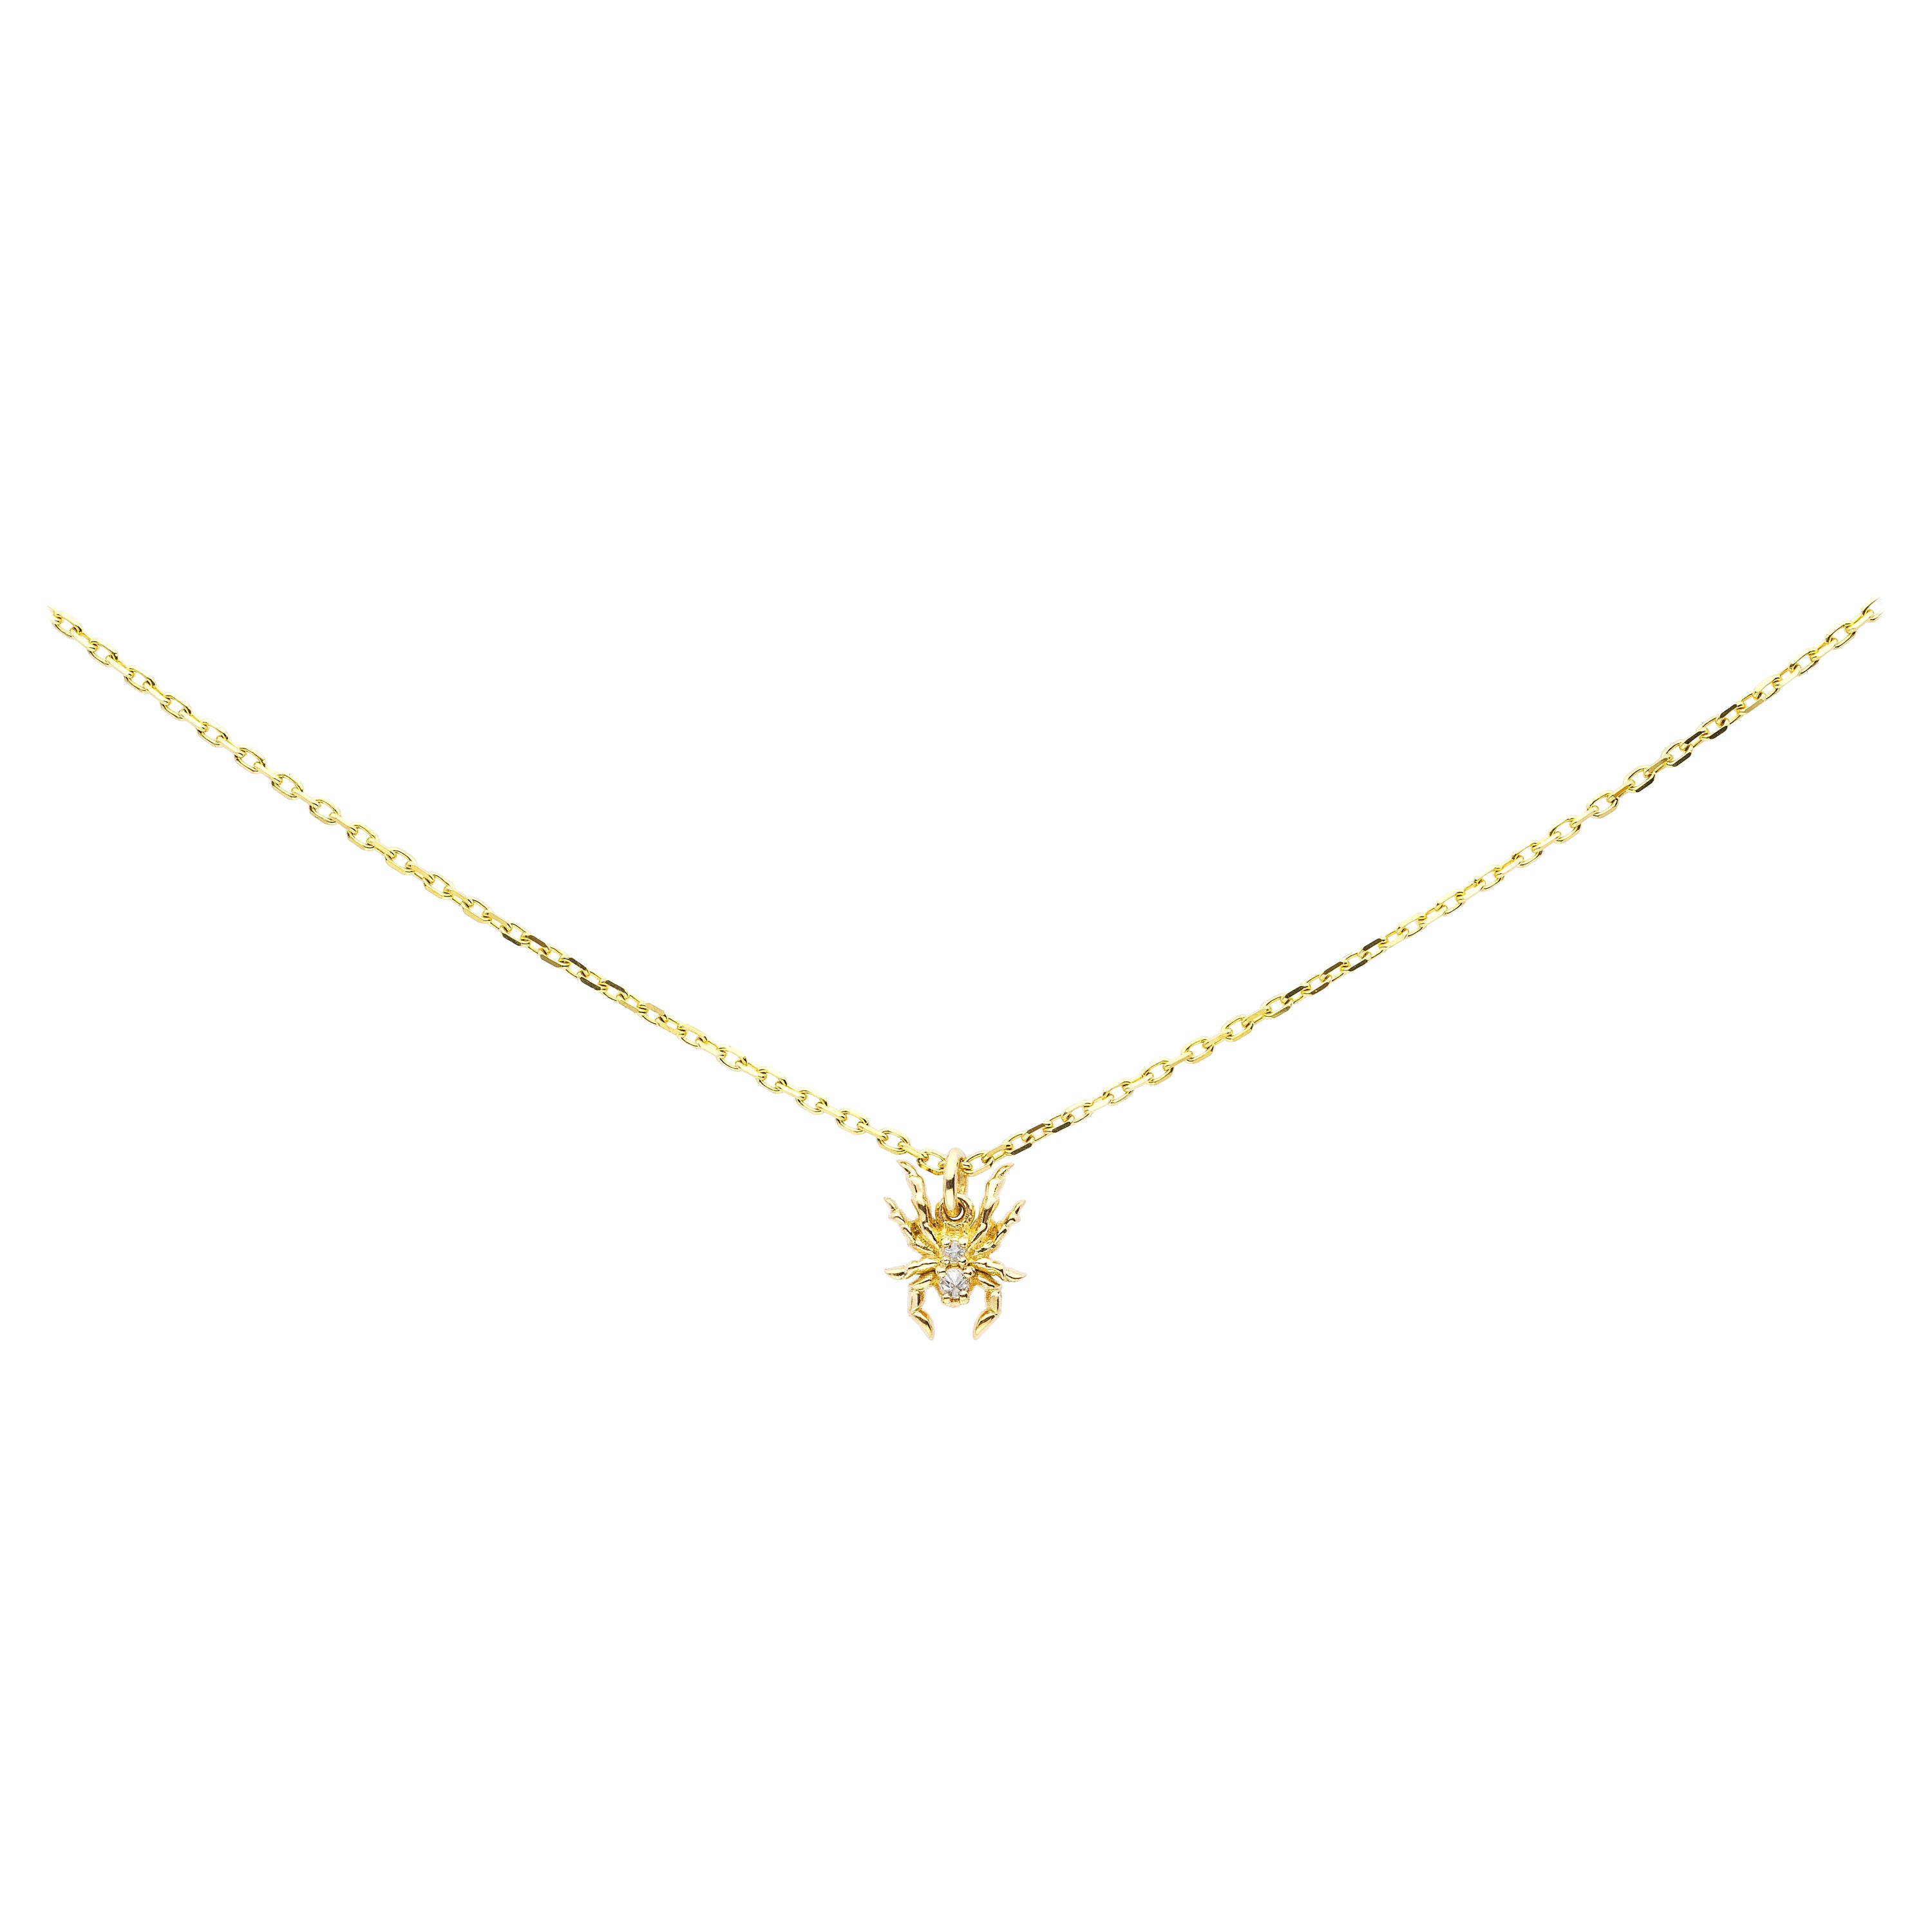 AnaKatarina Yellow Gold and Diamond 'Creativity' Spider Charm Necklace For Sale